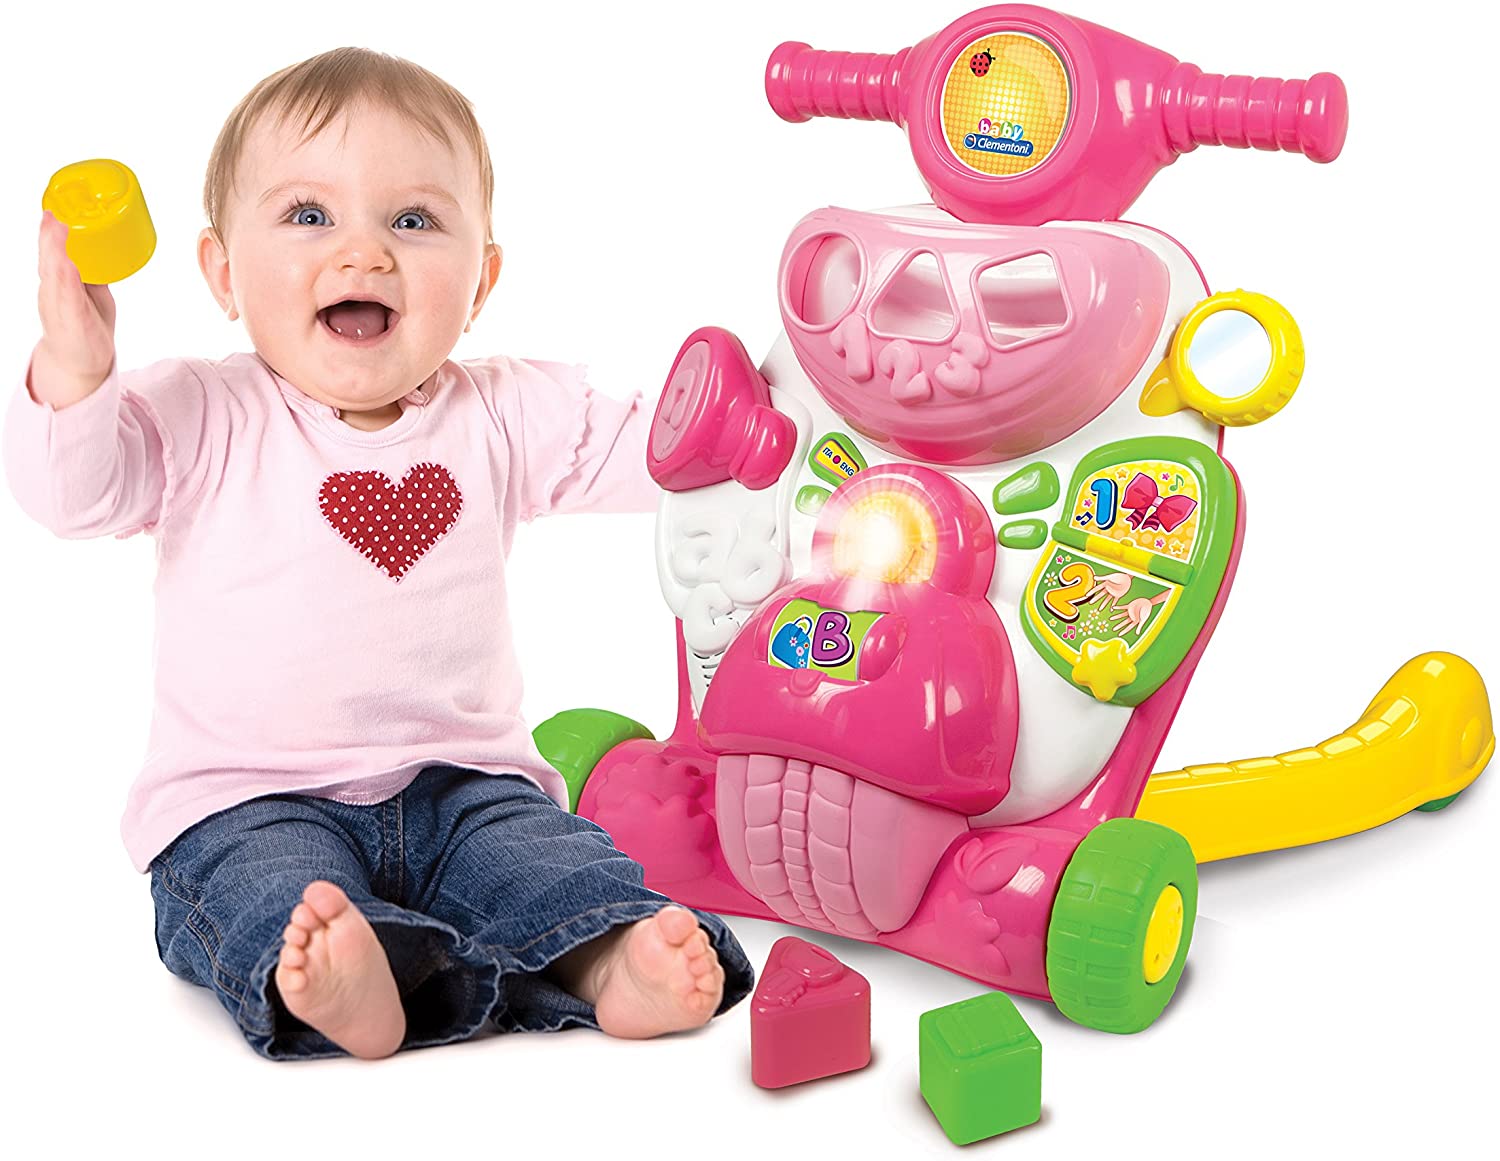 Baby Clementoni - Valentina Scooter - First steps - Baby Activity Toy - English & Italian